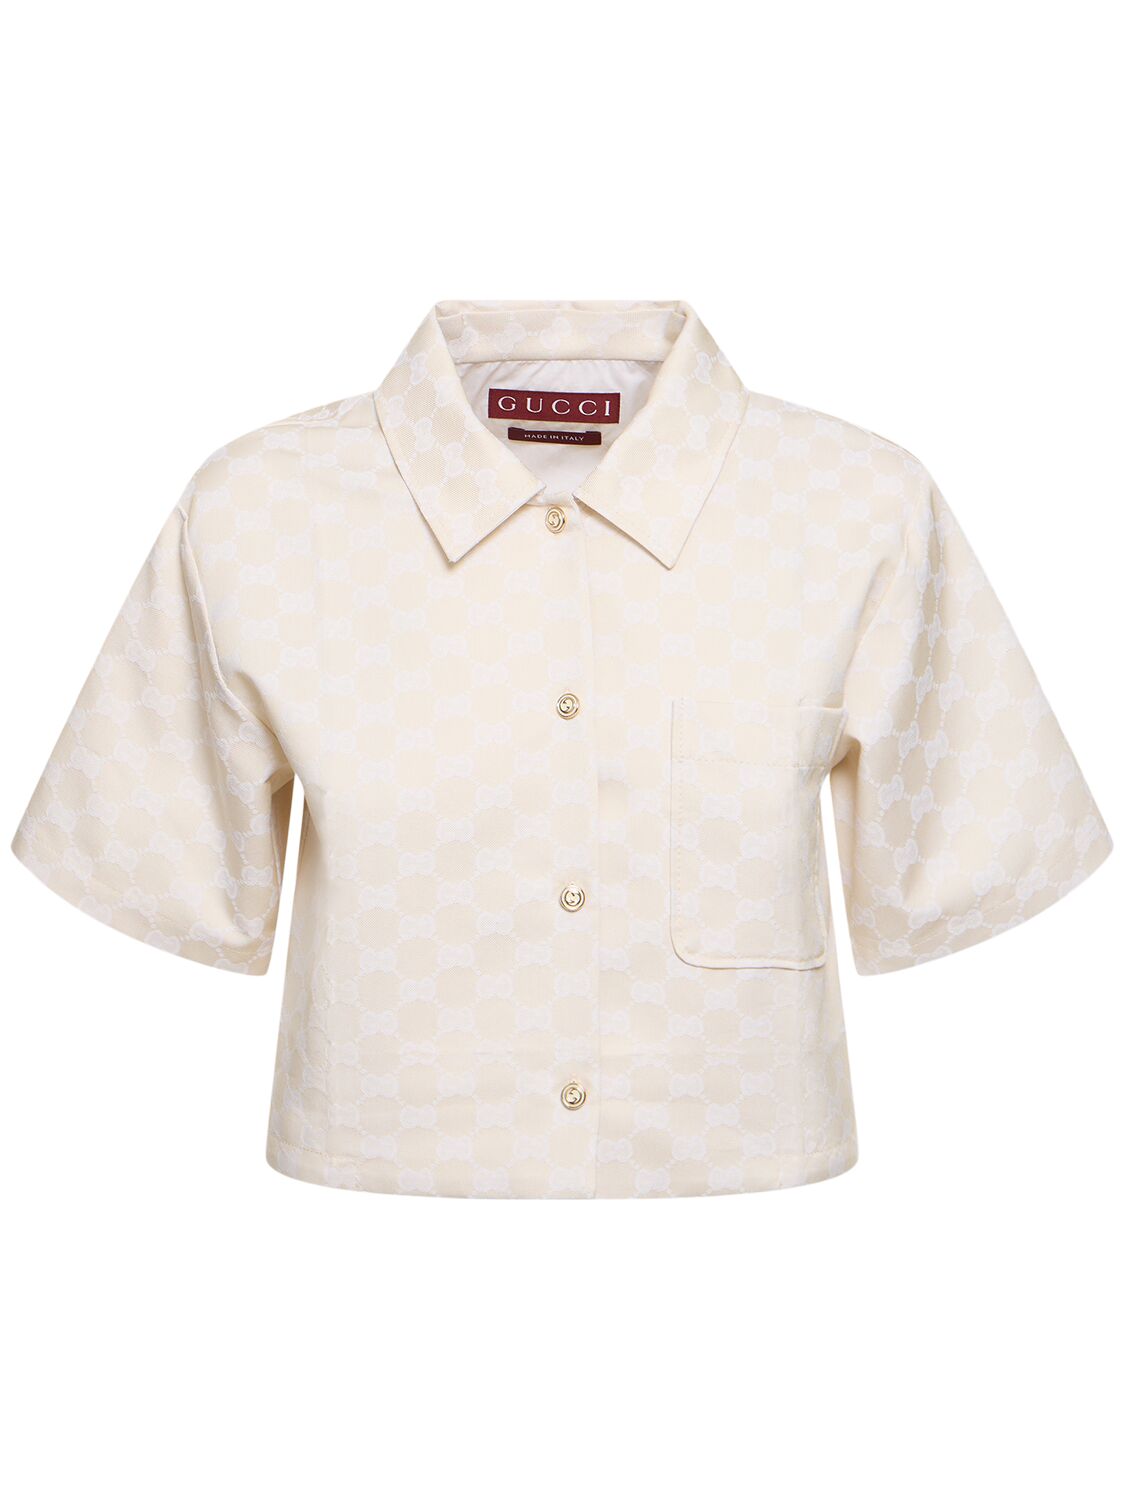 Gucci Gg Cotton Blend Shirt In Salty Sand